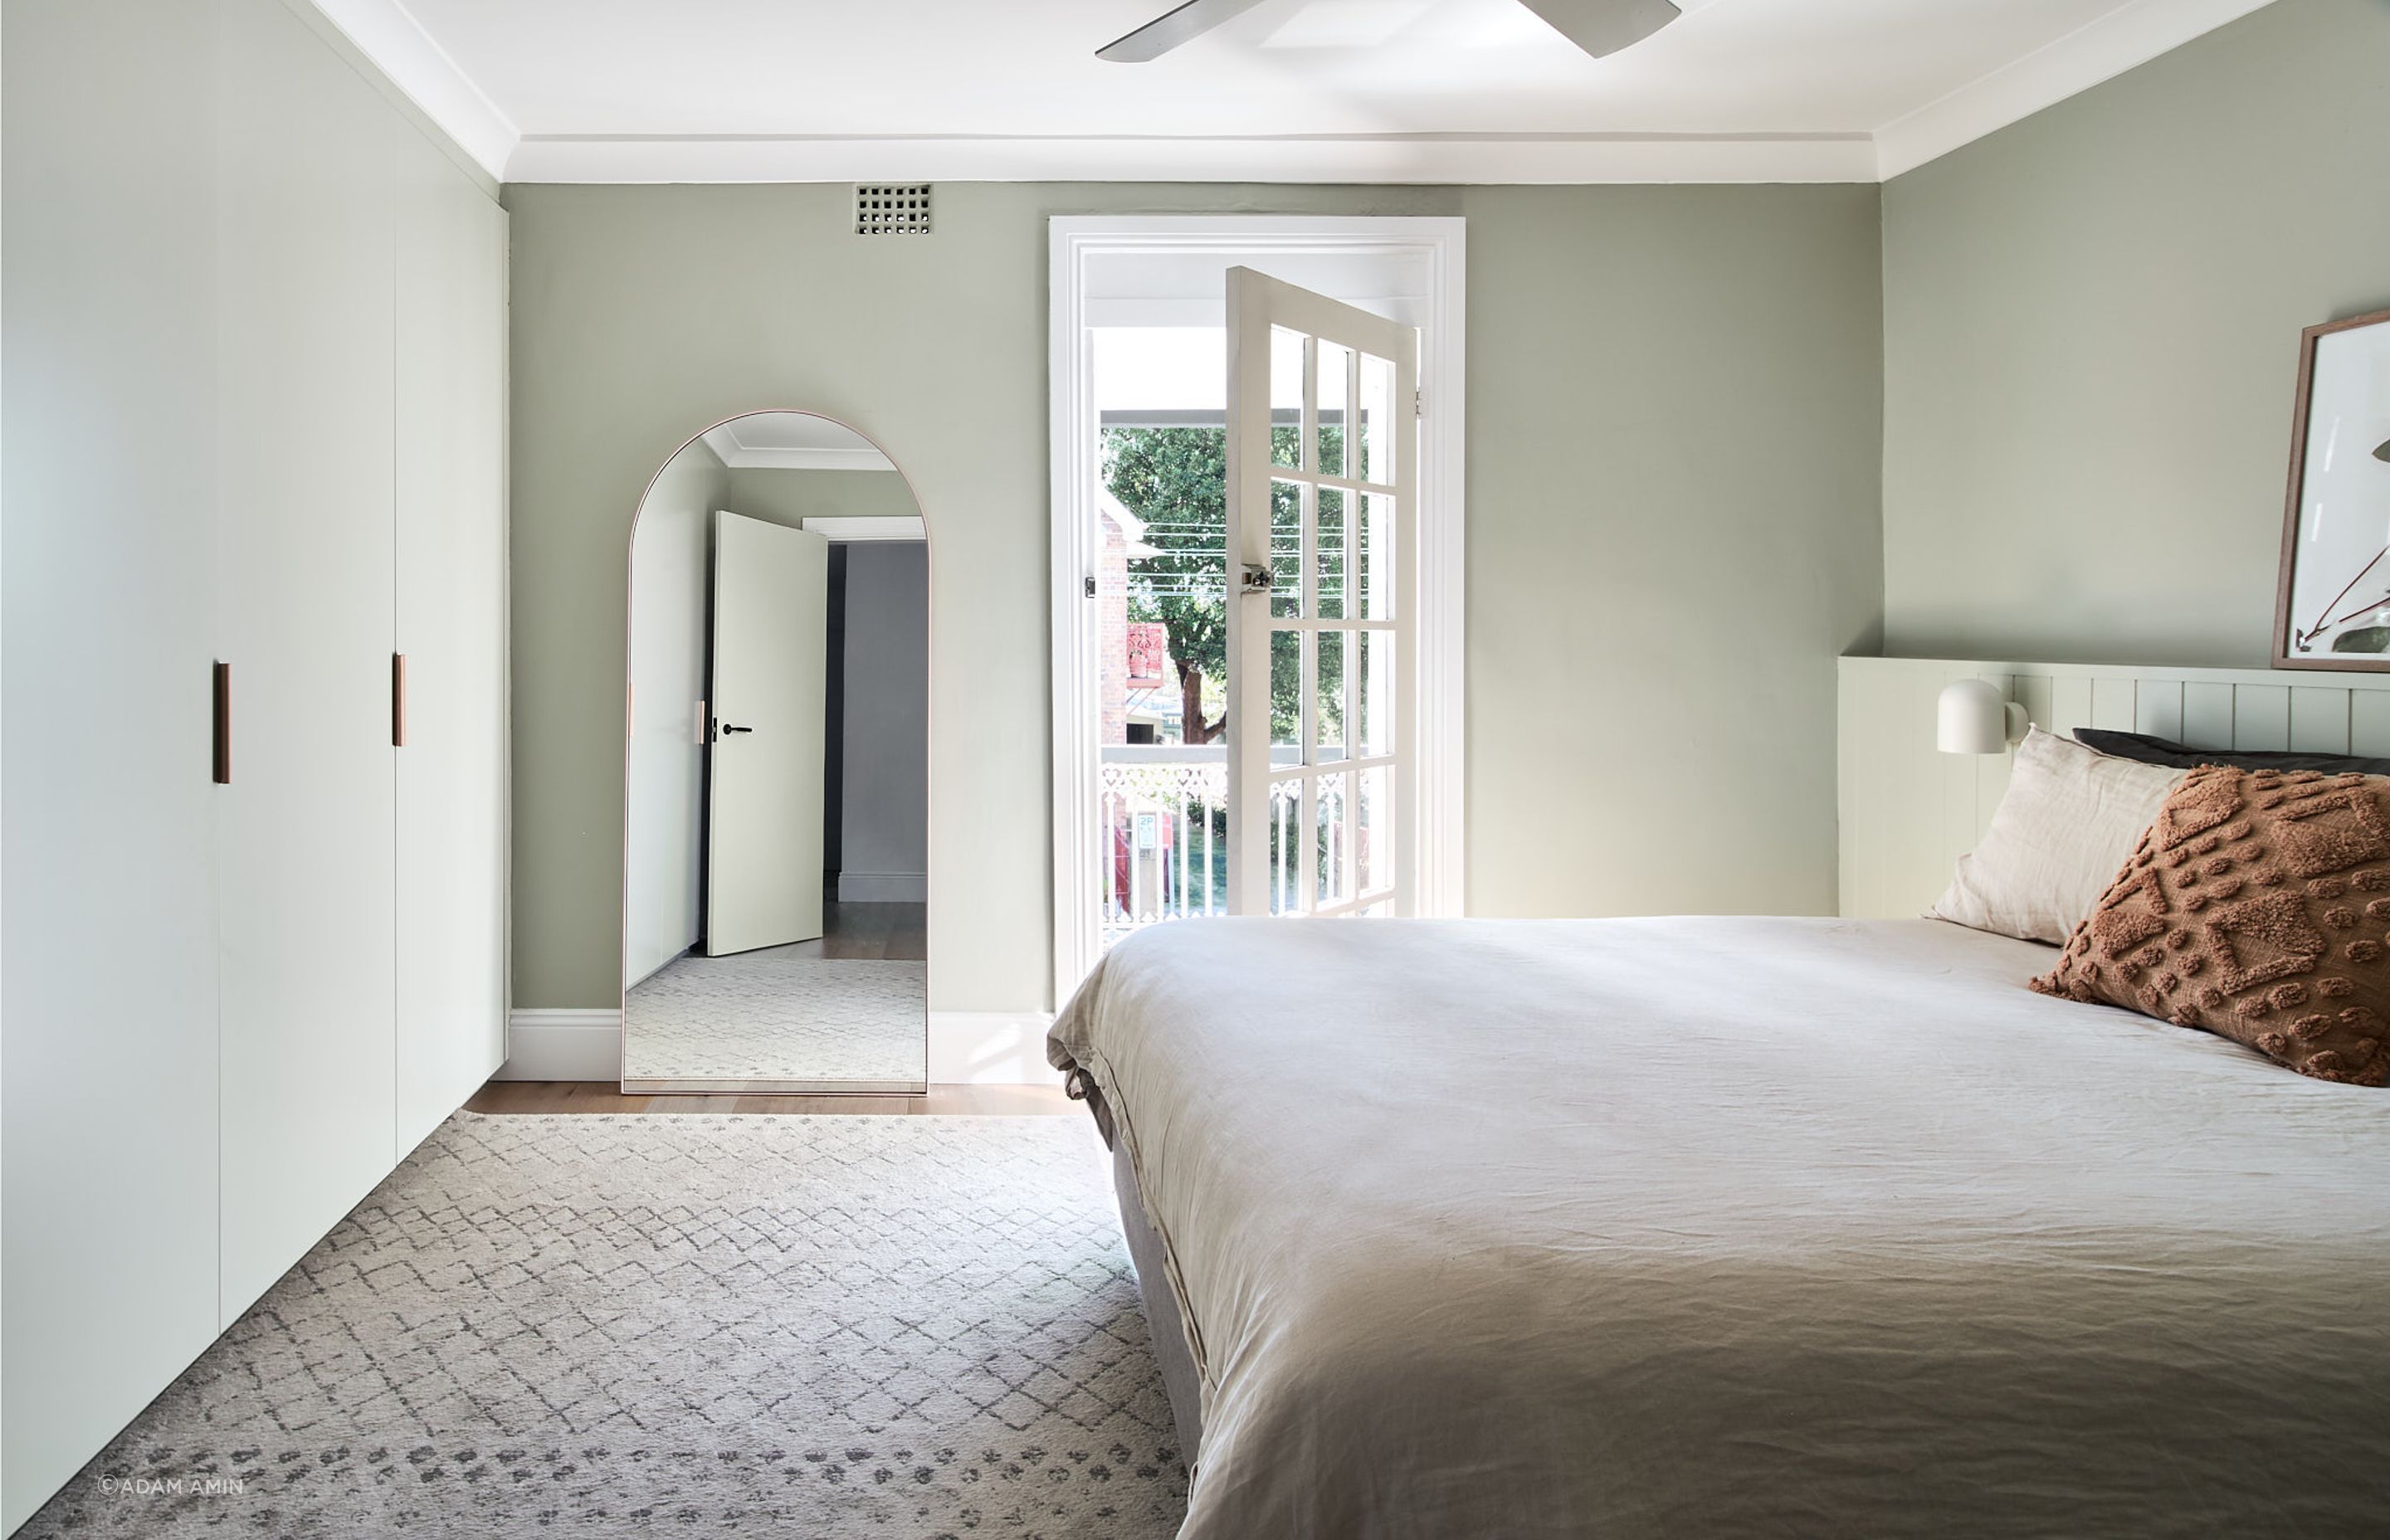 Graced with the same green hue, access to the street-facing balcony on the home's northern side is via the main bedroom.